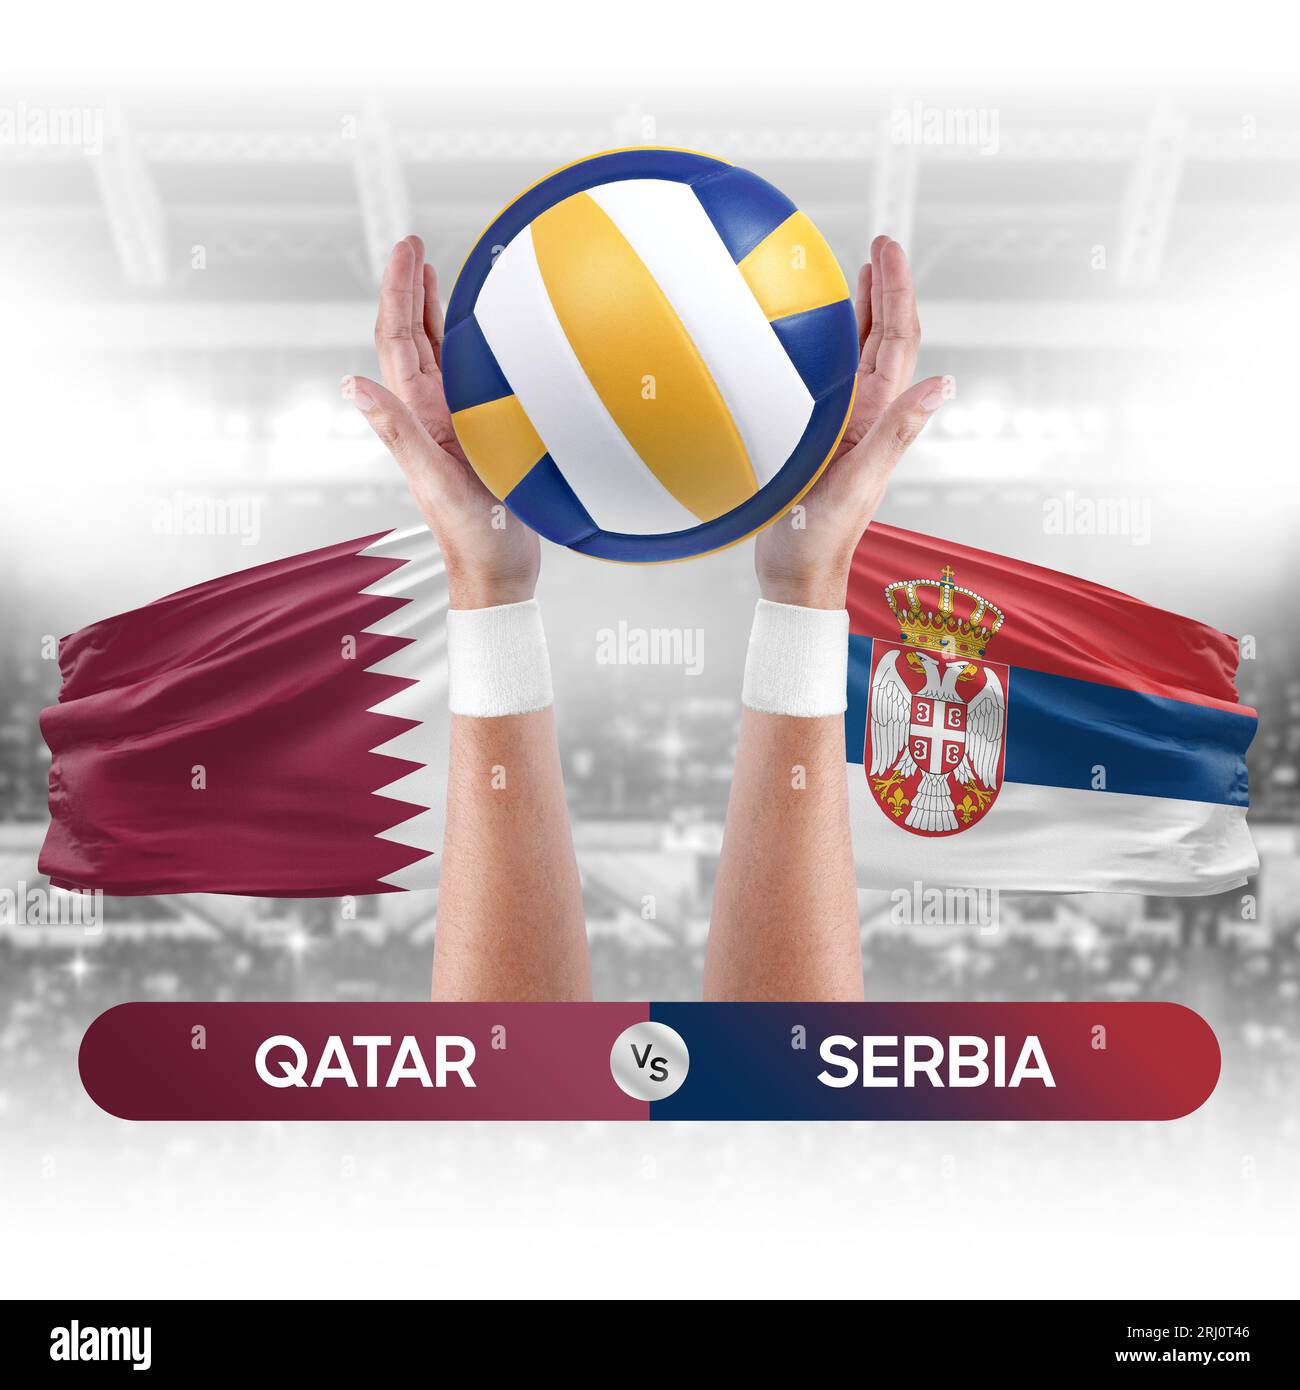 Qatar vs Serbia national teams volleyball volley ball match competition concept. Stock Photo